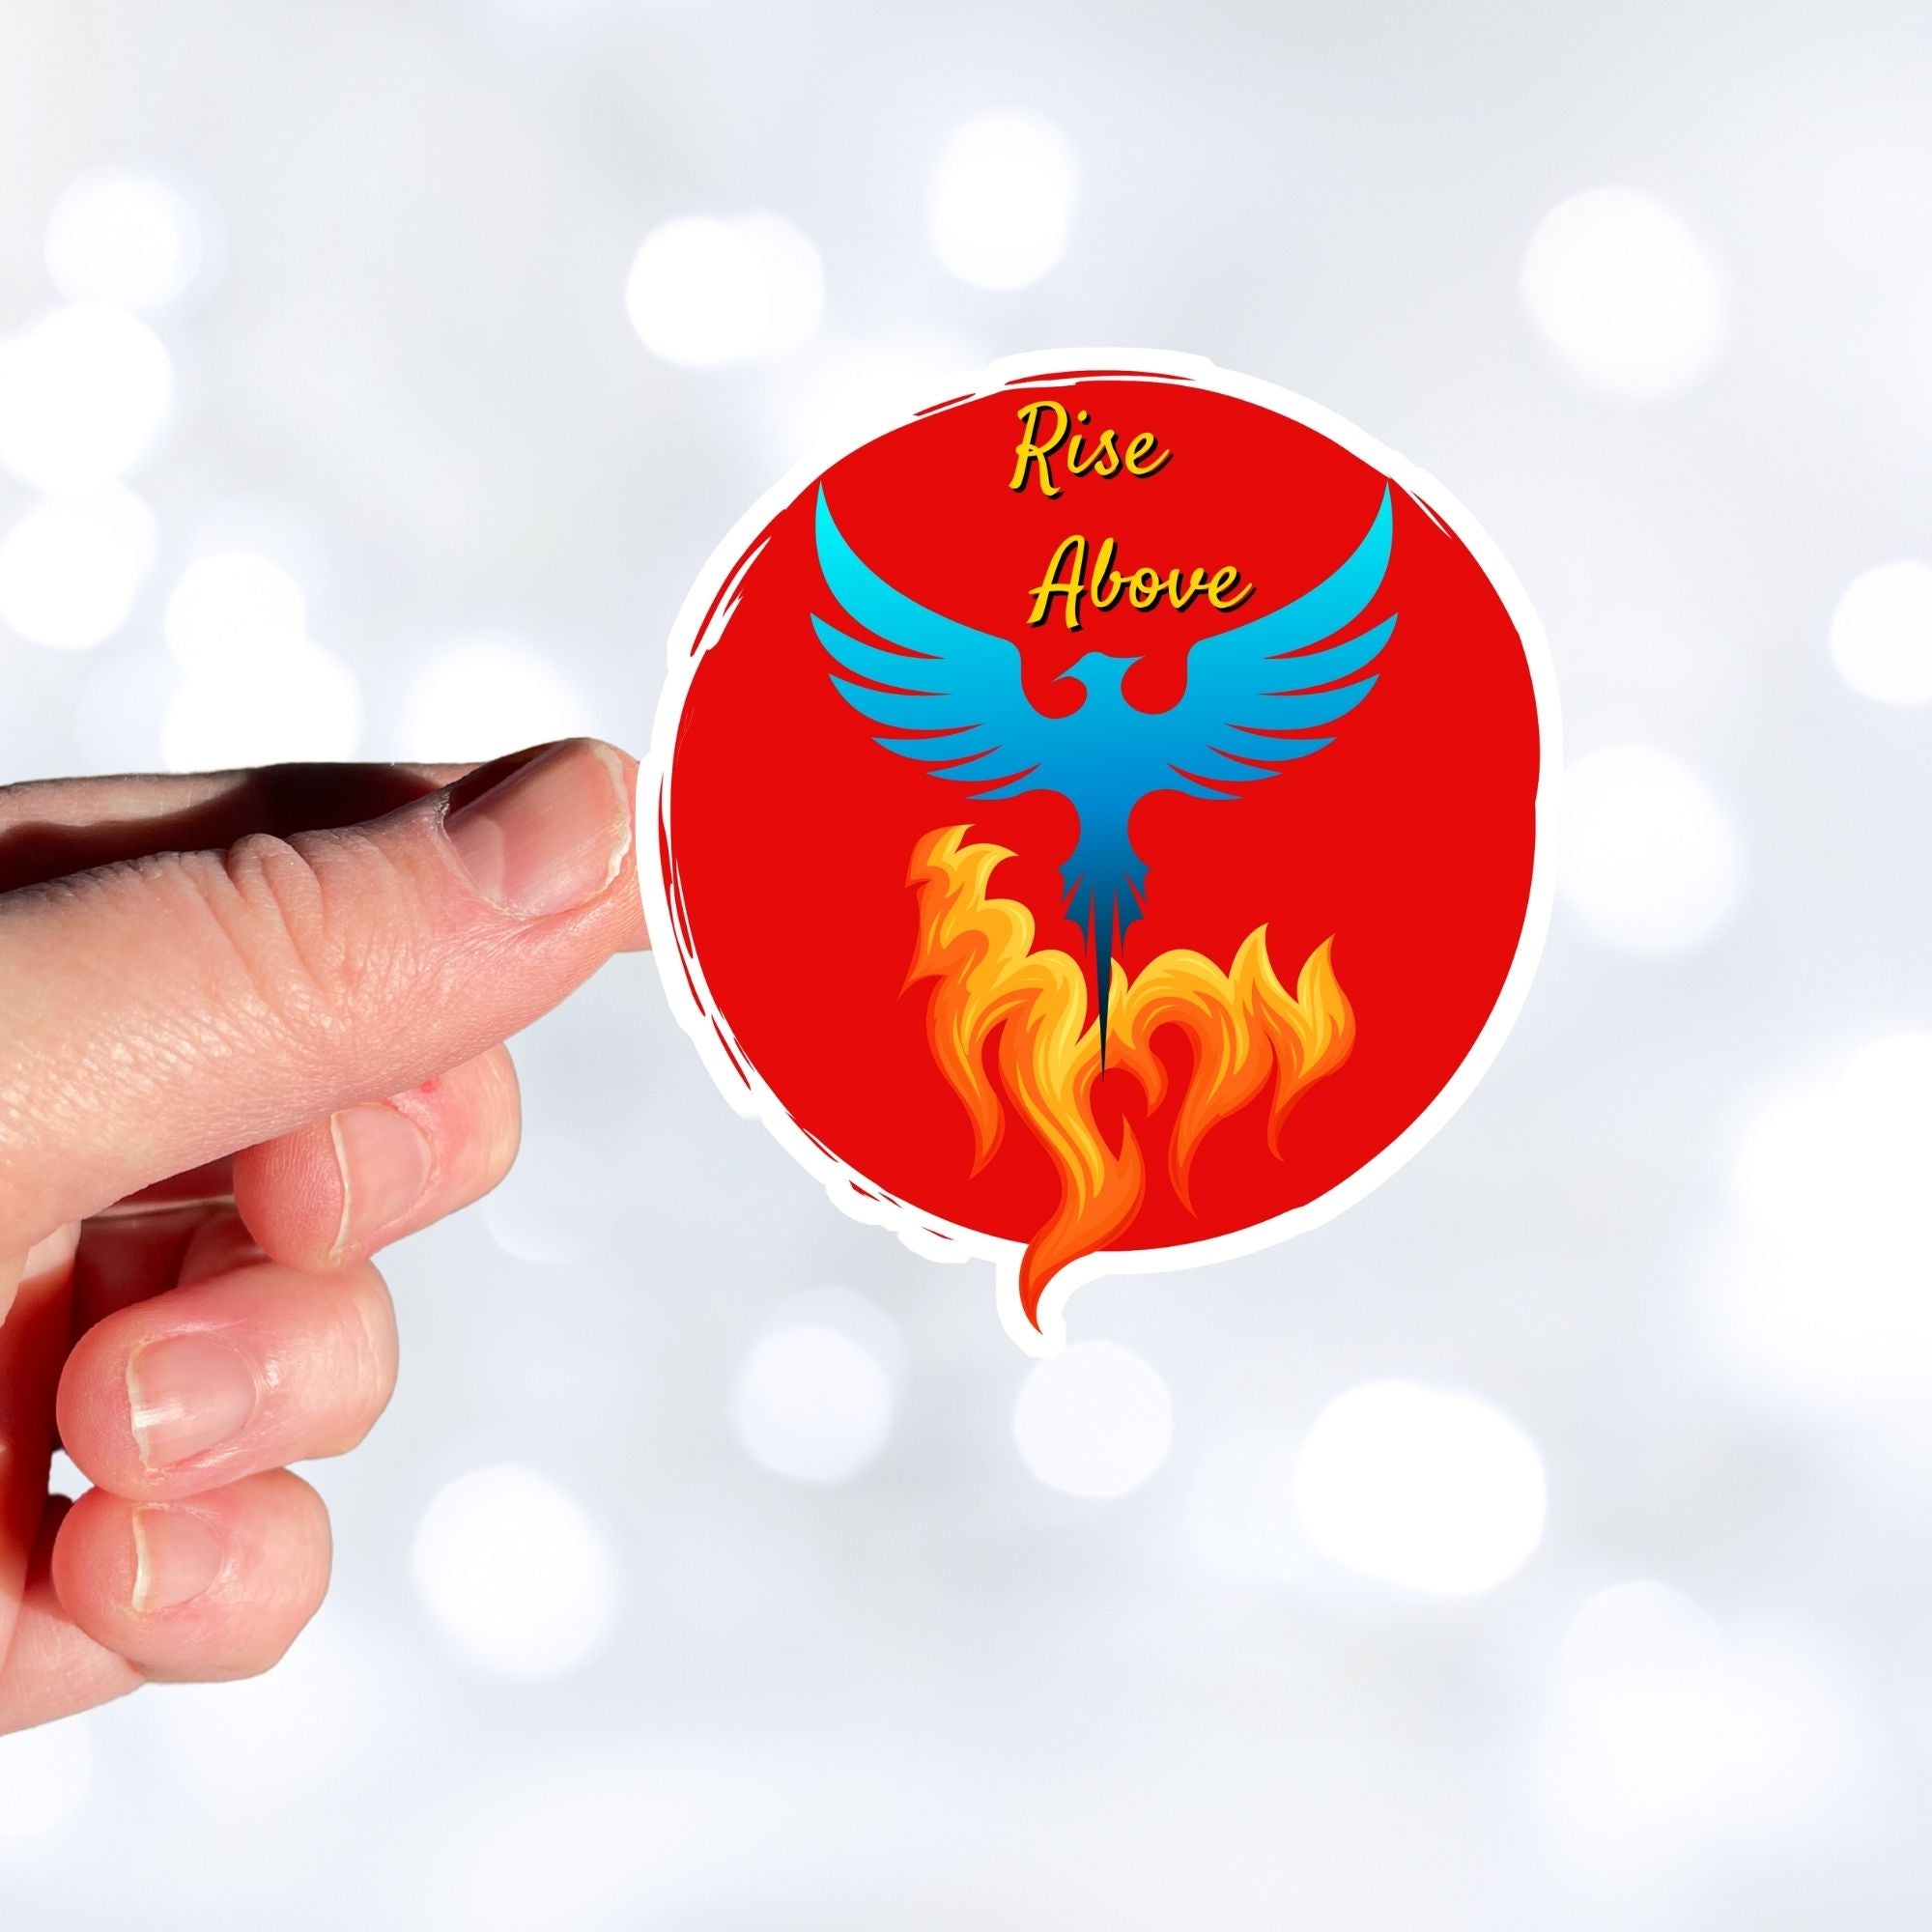 Phoenix rising - this individual die-cut sticker features a blue phoenix rising out of flames with the words "Rise Above" at the top, all on a red background. This image shows a hand holding the Rise Above sticker.